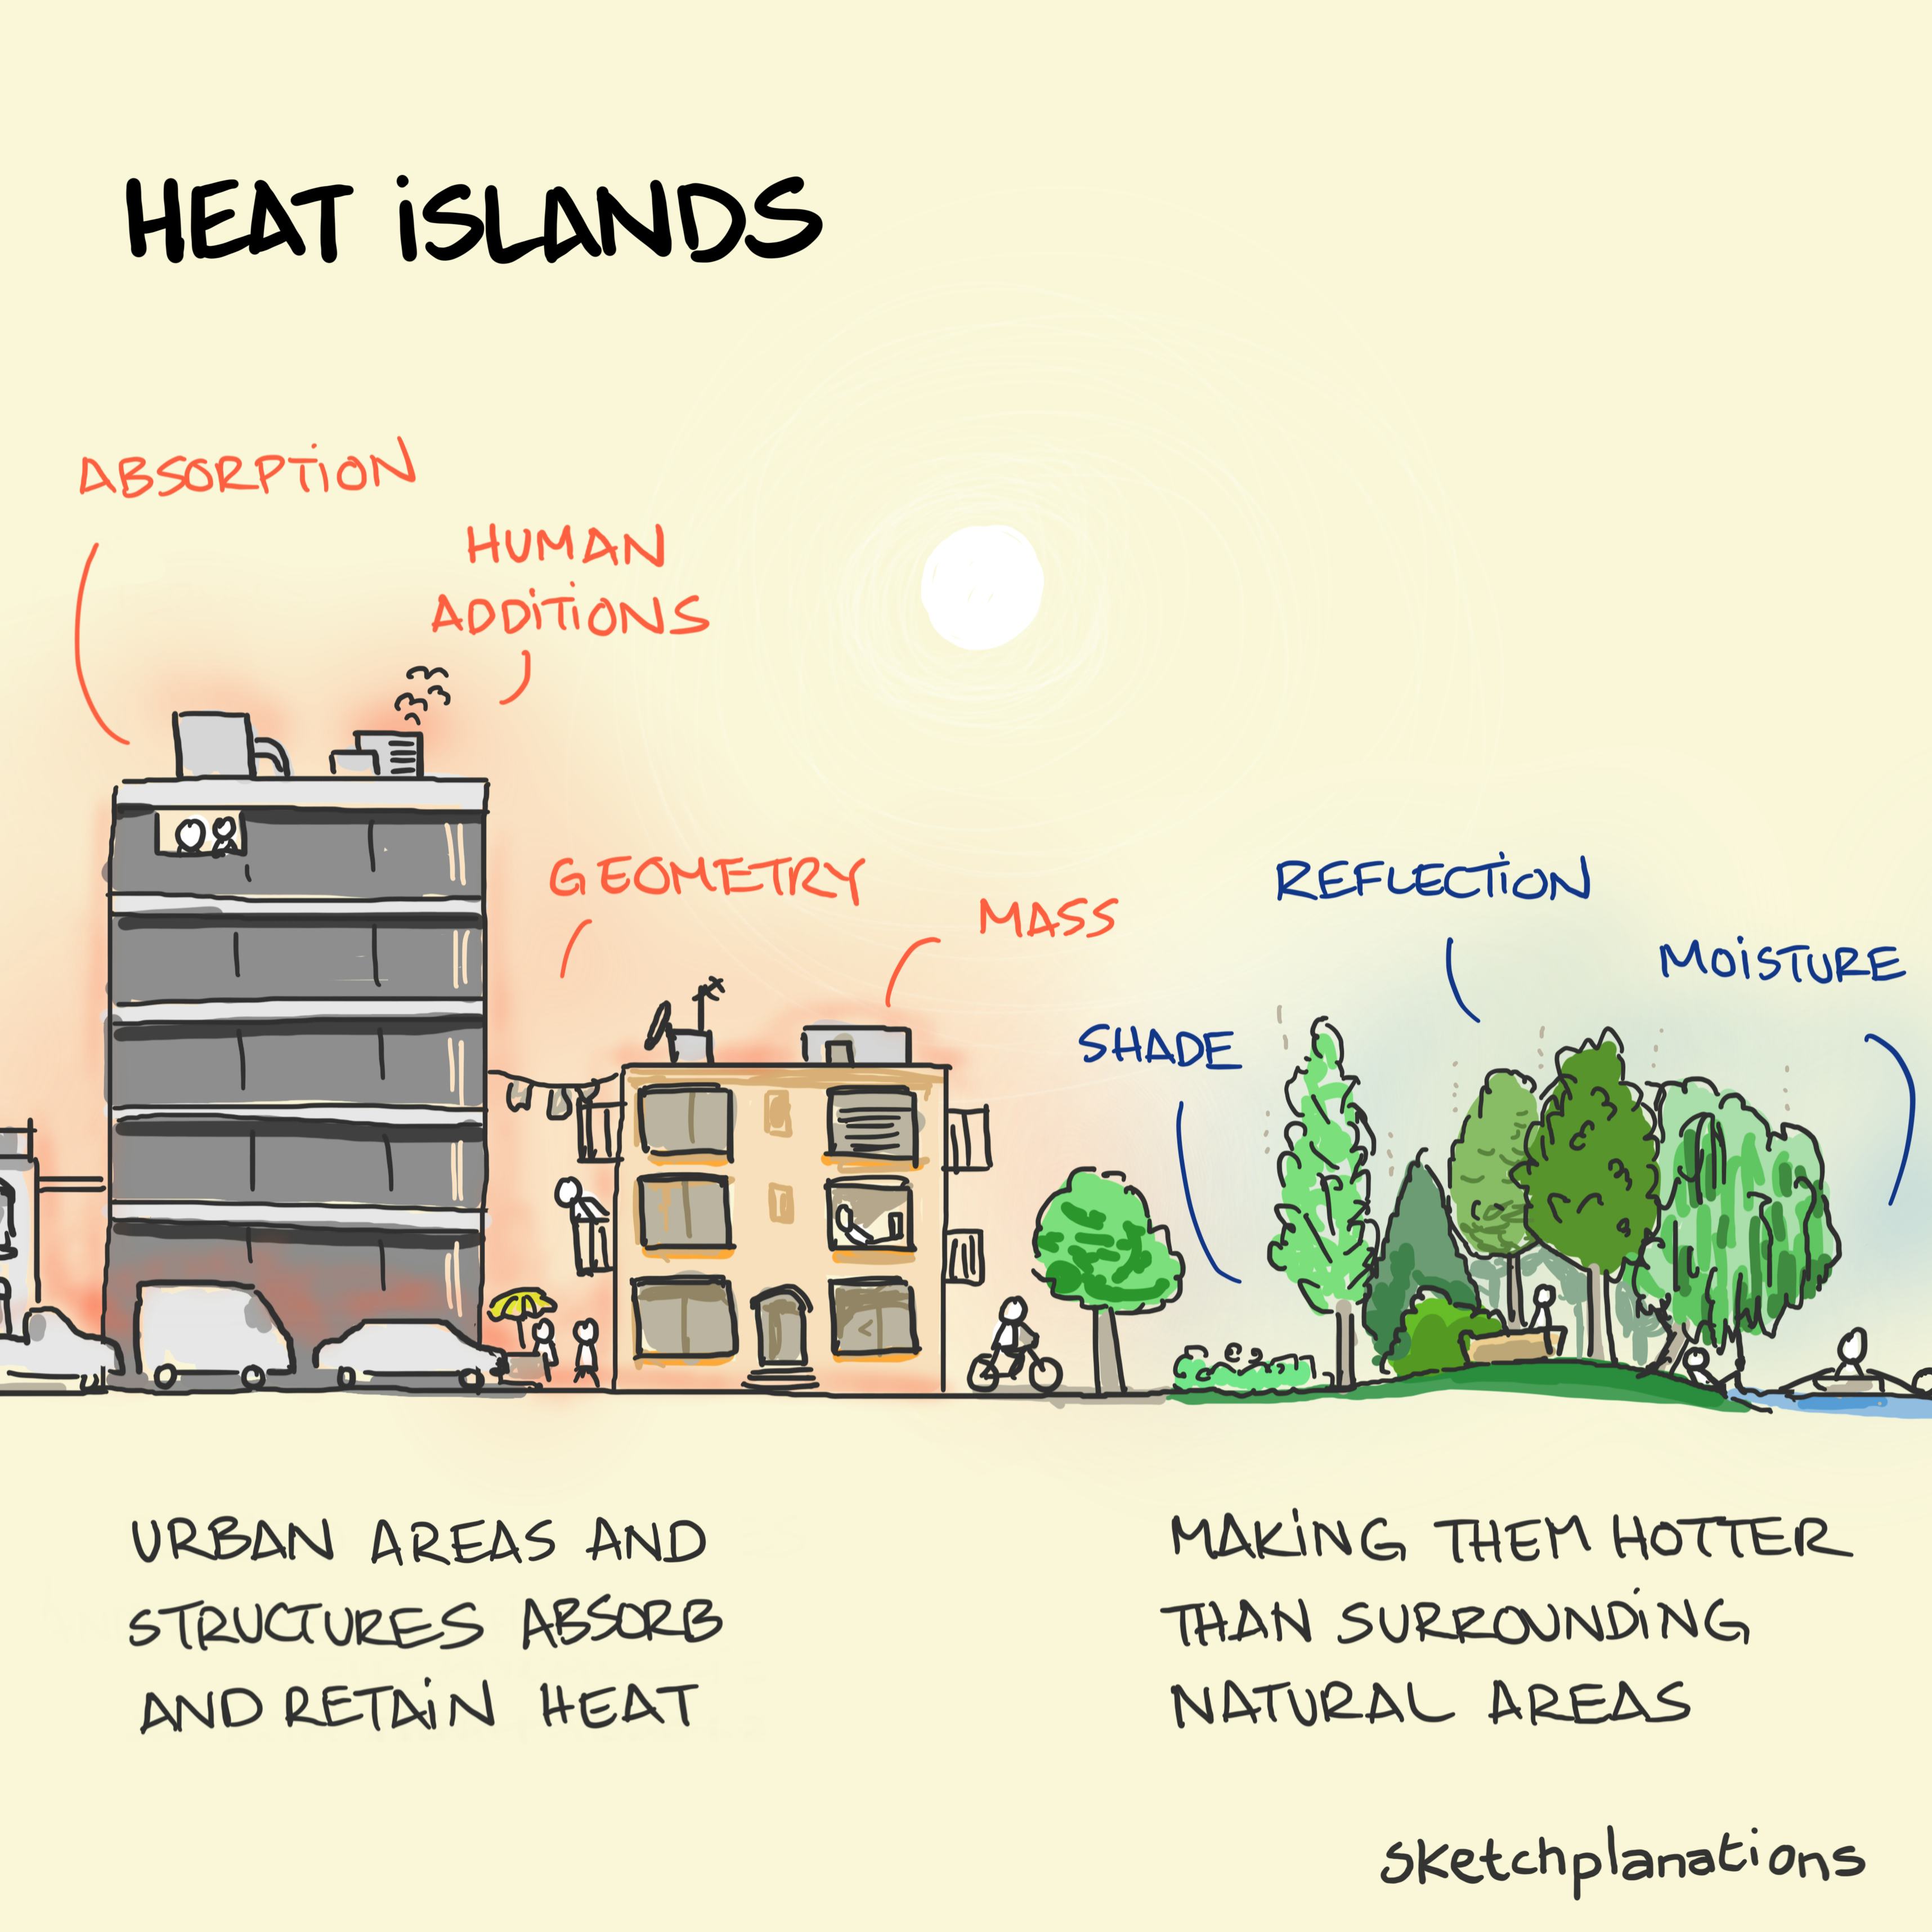 An urban area next to a more natural rural area showing how the urban area gets hotter than the surrounding land